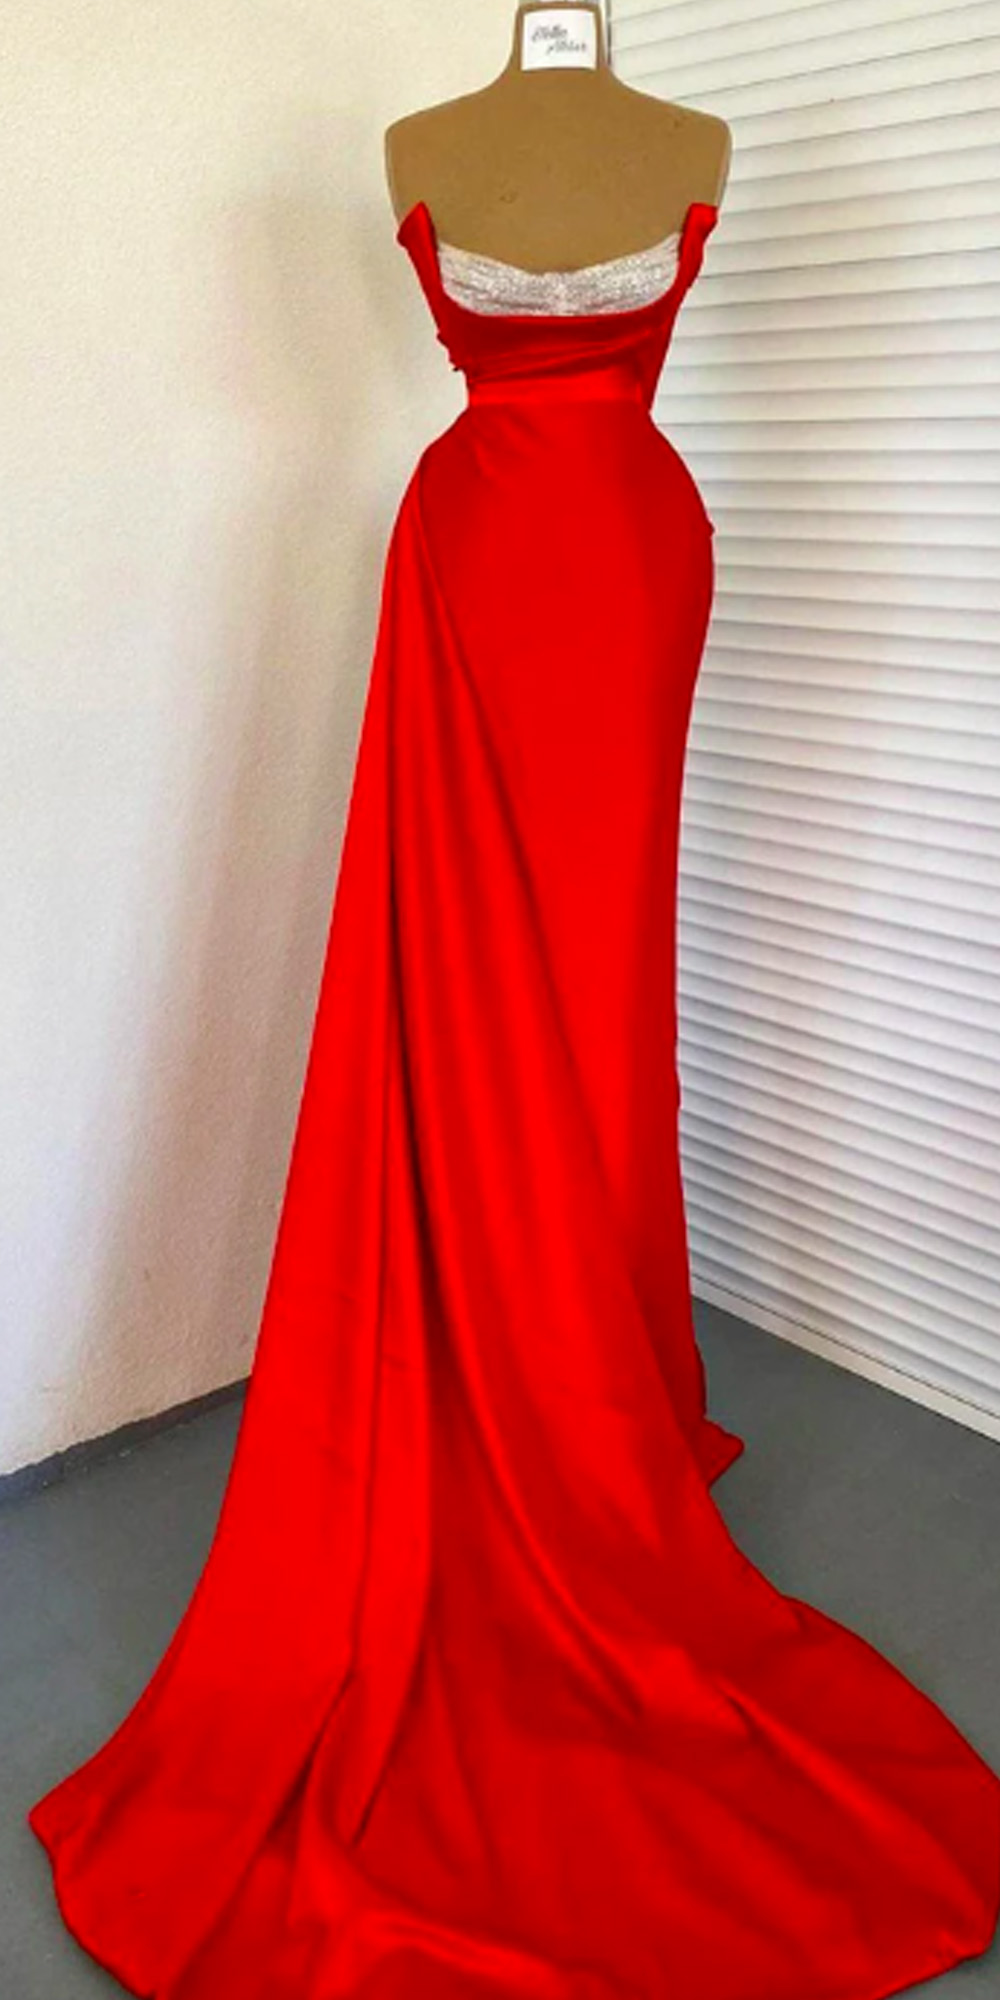 Solid Red Glitter Mermaid Evening Dresses Off Shoulder Shiny Satin Dubai Formal Prom Dress Sparkly Bodycon Party Gowns